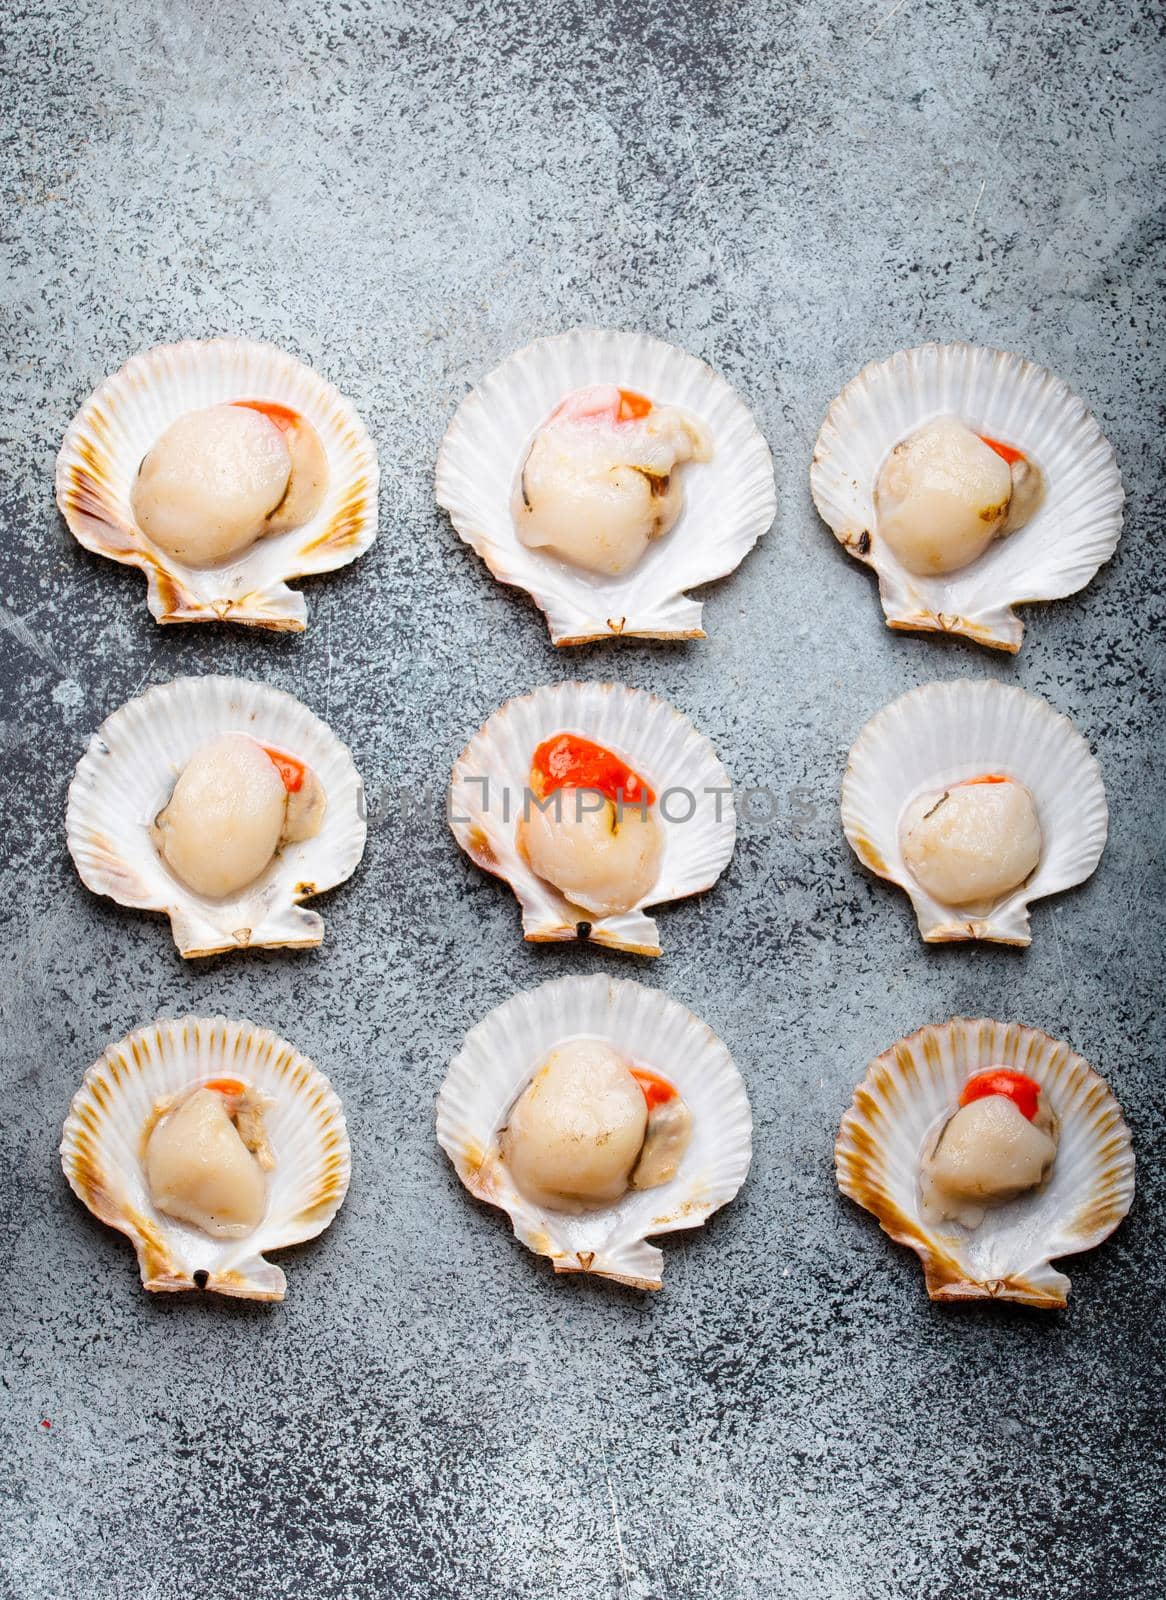 Raw fresh uncooked scallops in shells on grey rustic concrete background, top view, close-up. Seafood concept pattern